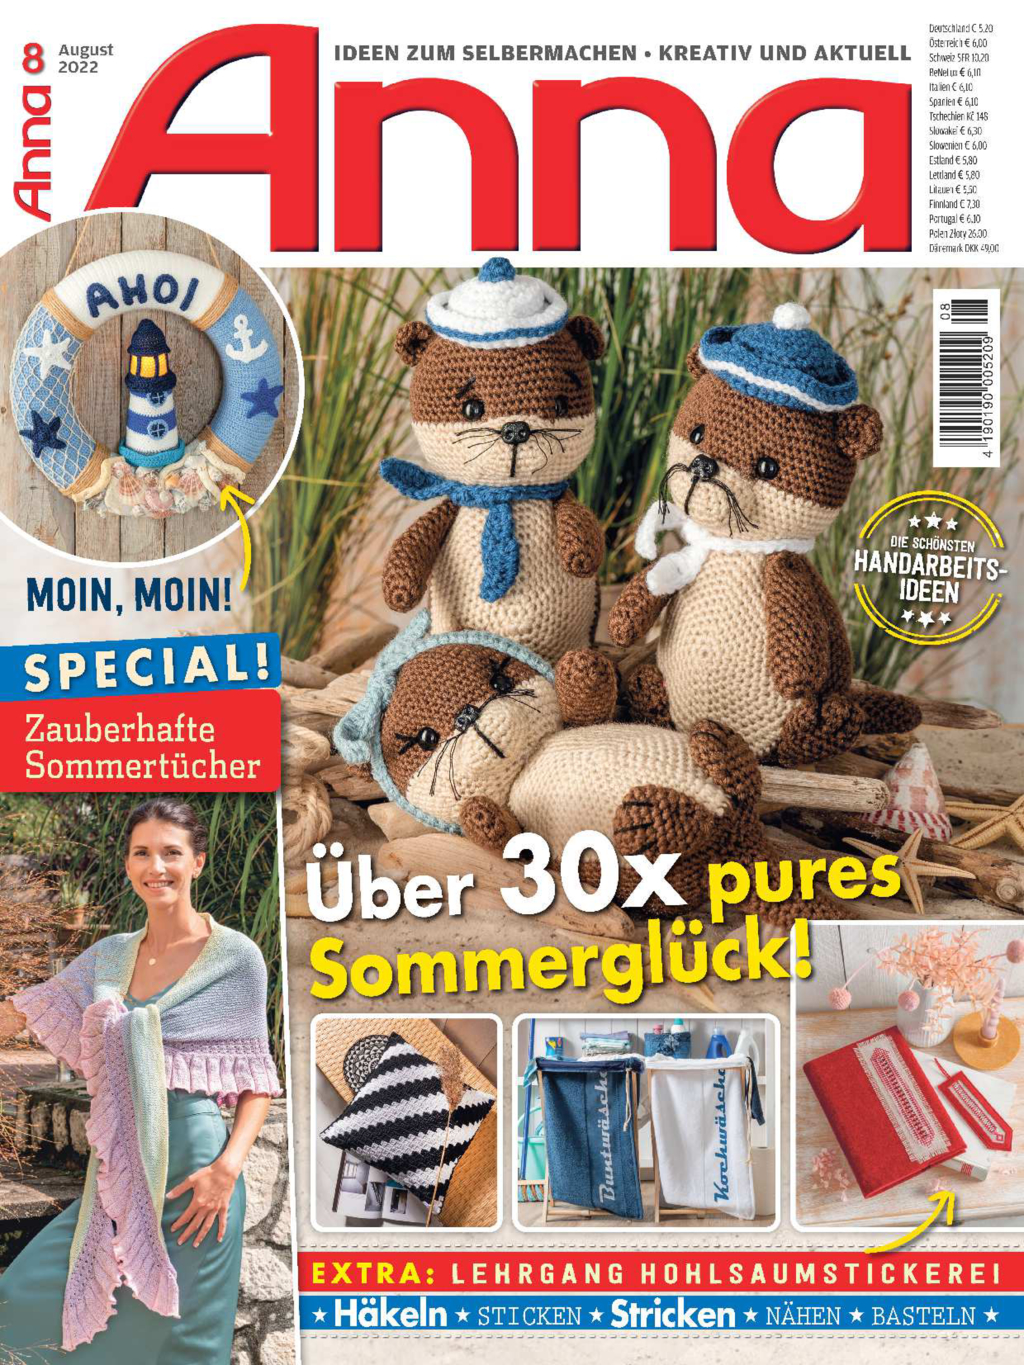 E-Paper: Anna Nr. 8/2022 - 30 x pures Sommerglück!